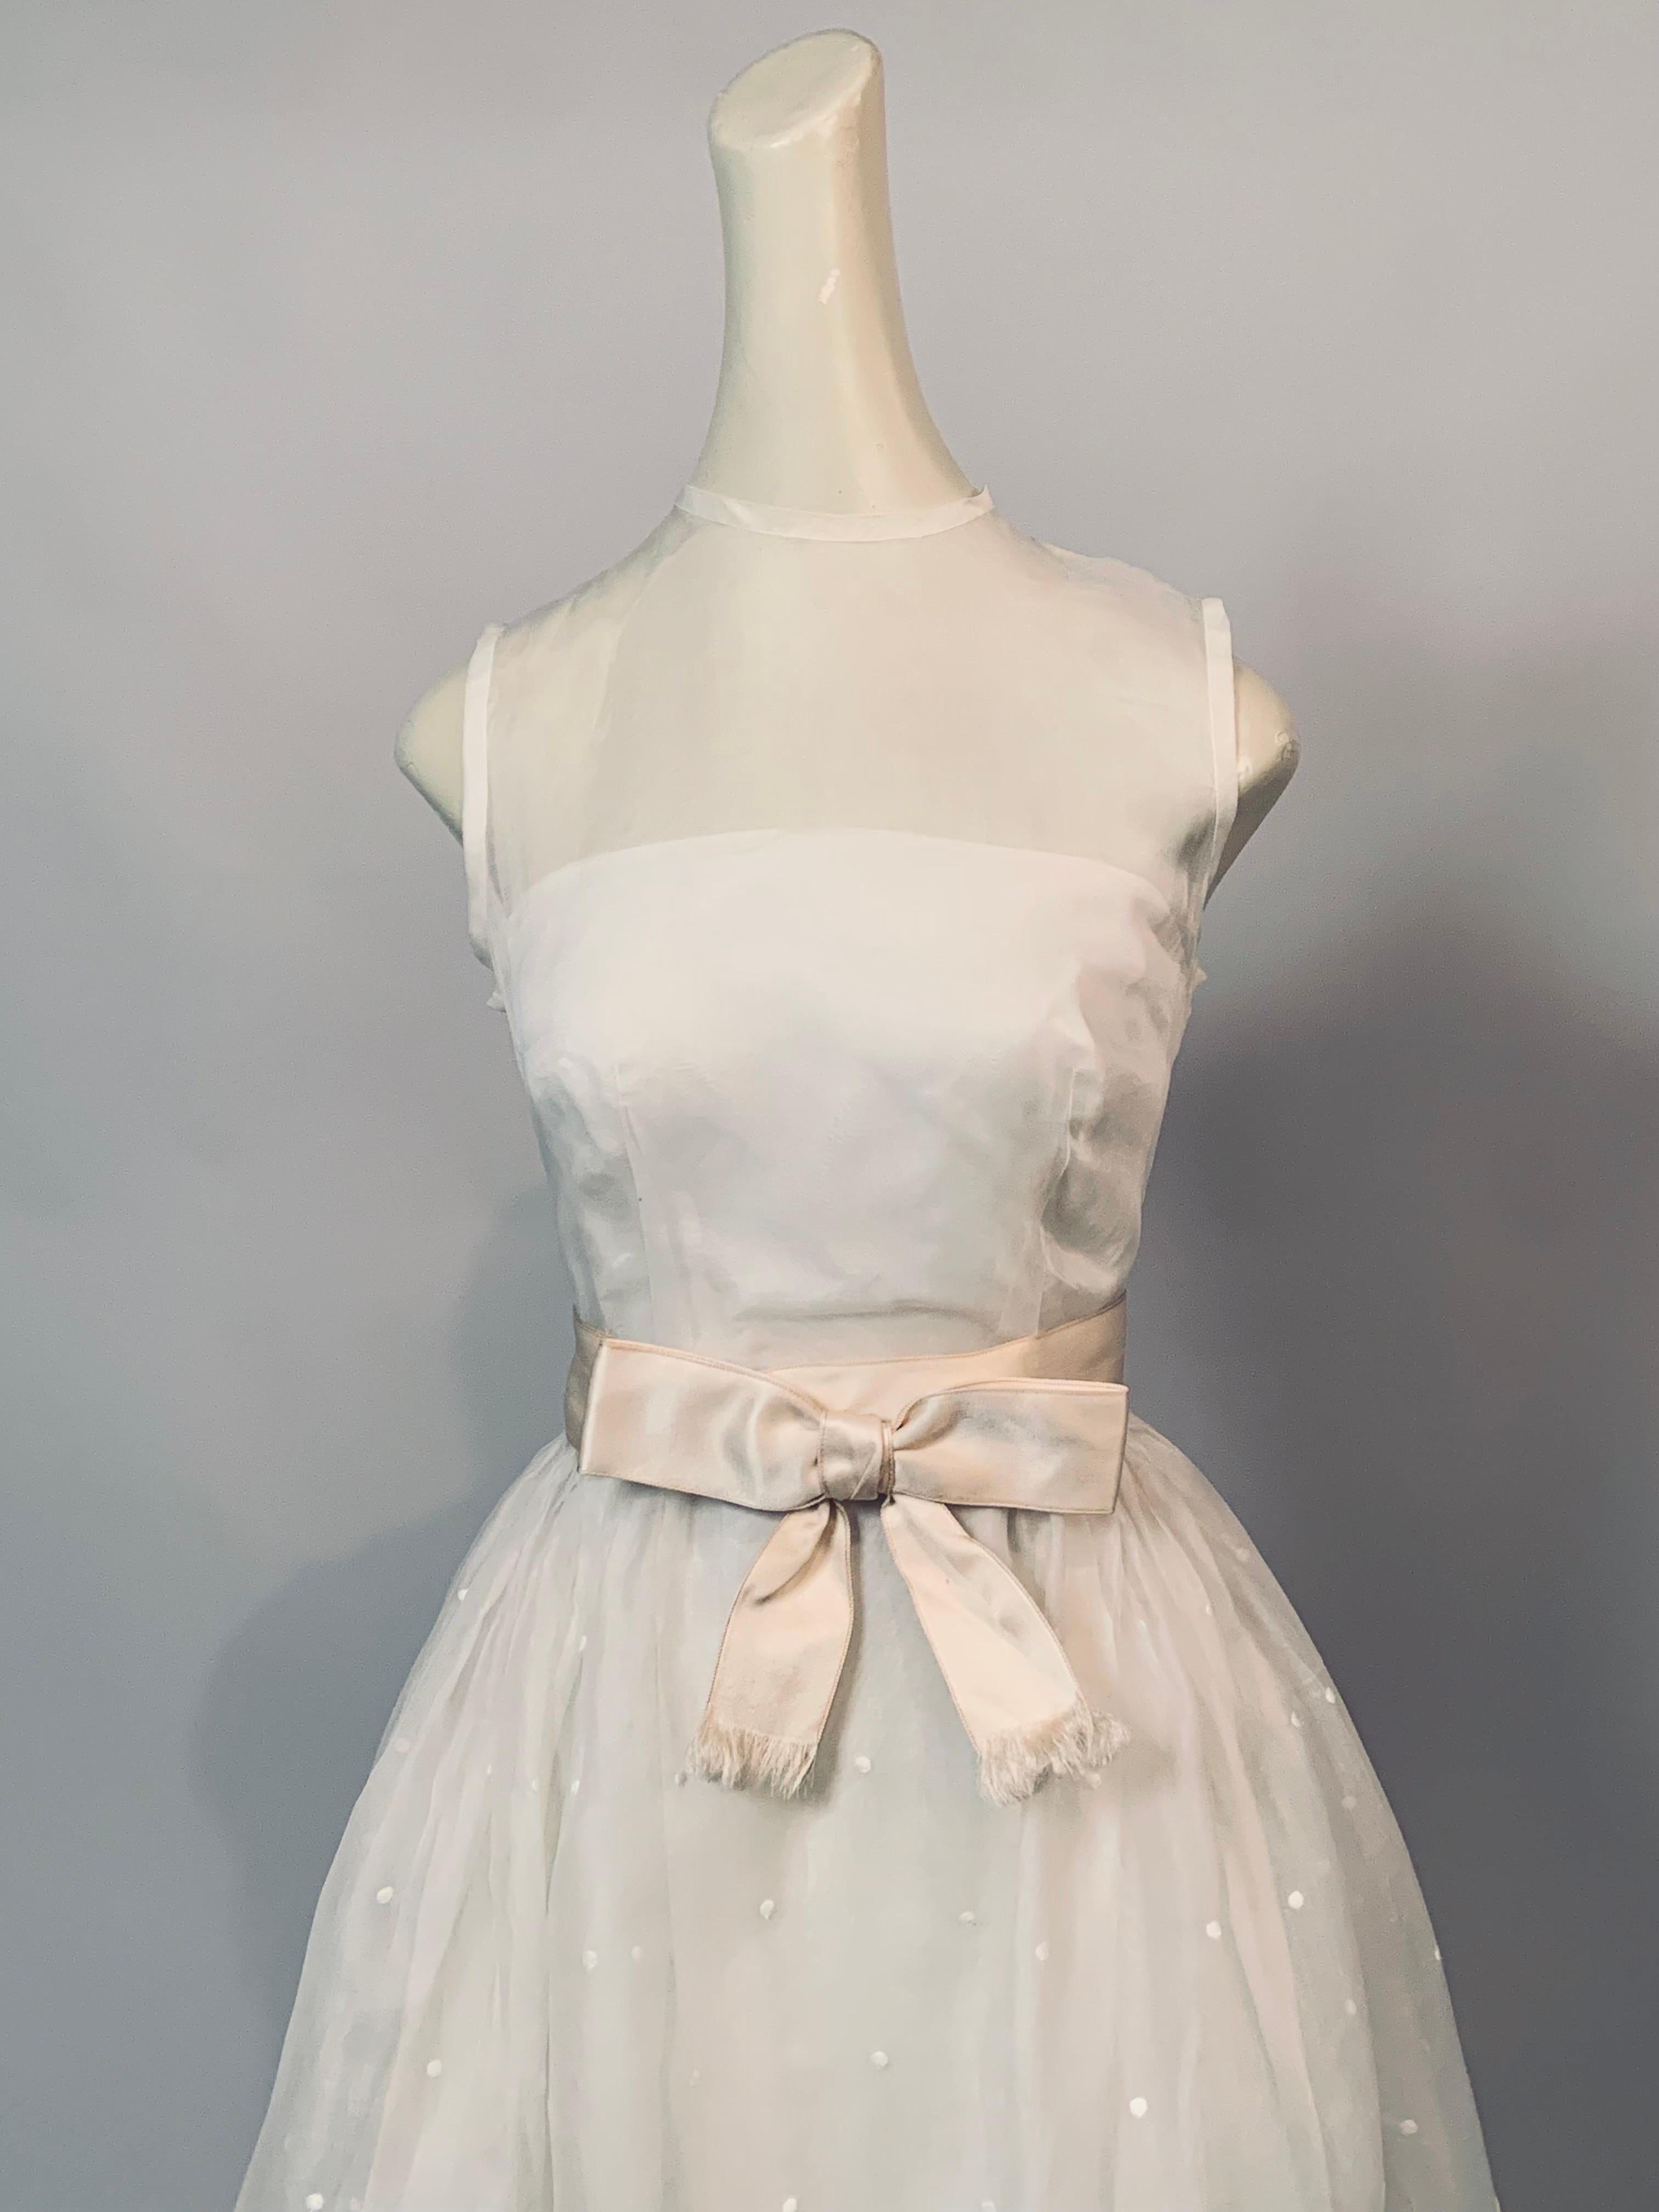 This beautiful embroidered white silk organza evening dress has a strapless taffeta bodice and petticoat with a sheer silk organza layer creating a sheer bodice and a beautiful embroidered full skirt.   It is embroidered with white dots and  a deep